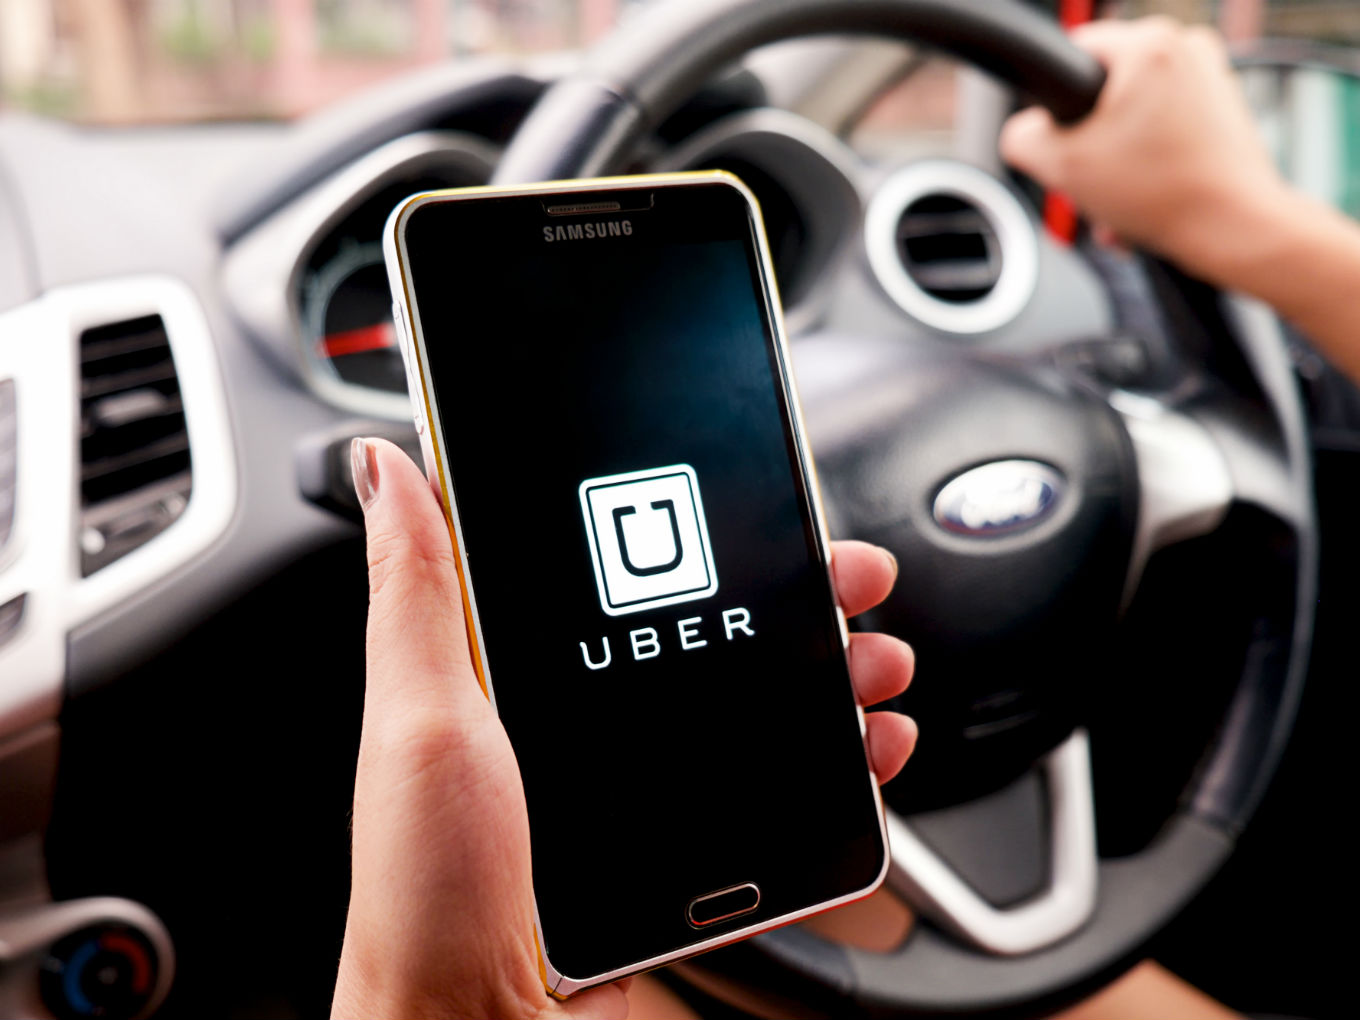 Uber India Accounts For 11% Of Company’s Total Trips: Report